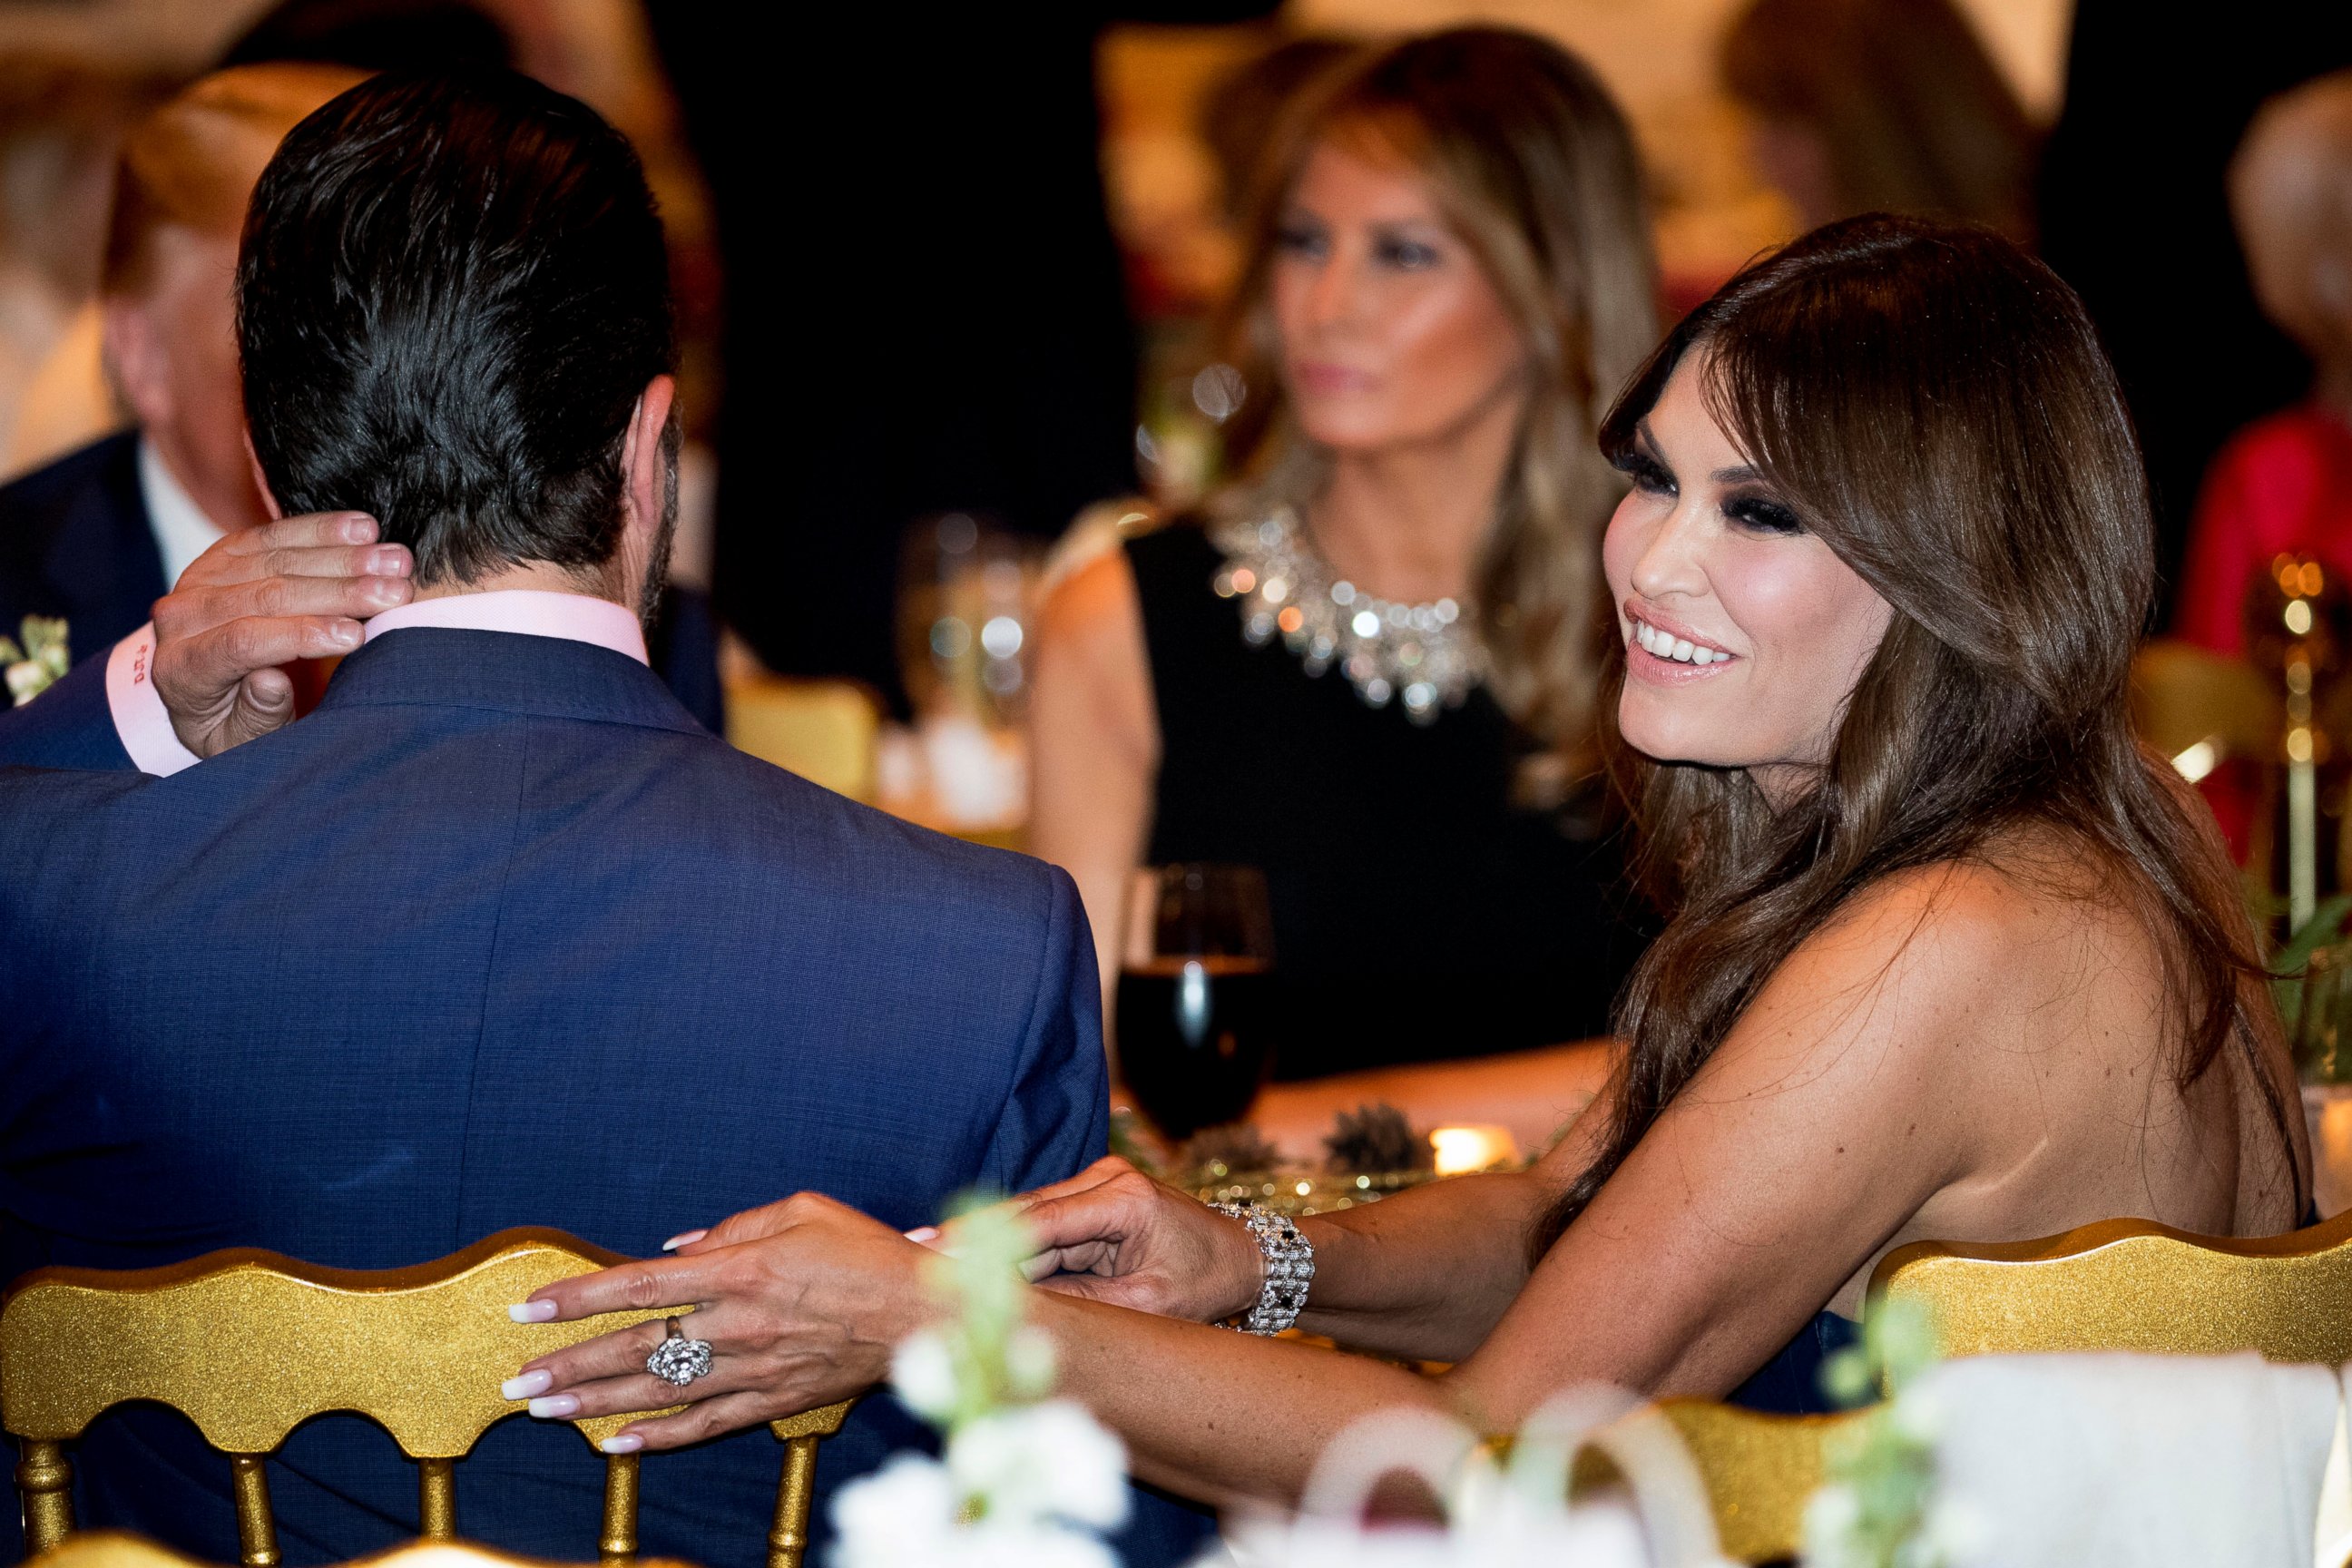 PHOTO: Kimberly Guilfoyle, right, and Donald Trump Jr., the son of President Donald Trump, left, sit with President Donald Trump, background left, and first lady Melania Trump, center, at Mar-a-lago in Palm Beach, Fla., Tuesday, Dec. 24, 2019.